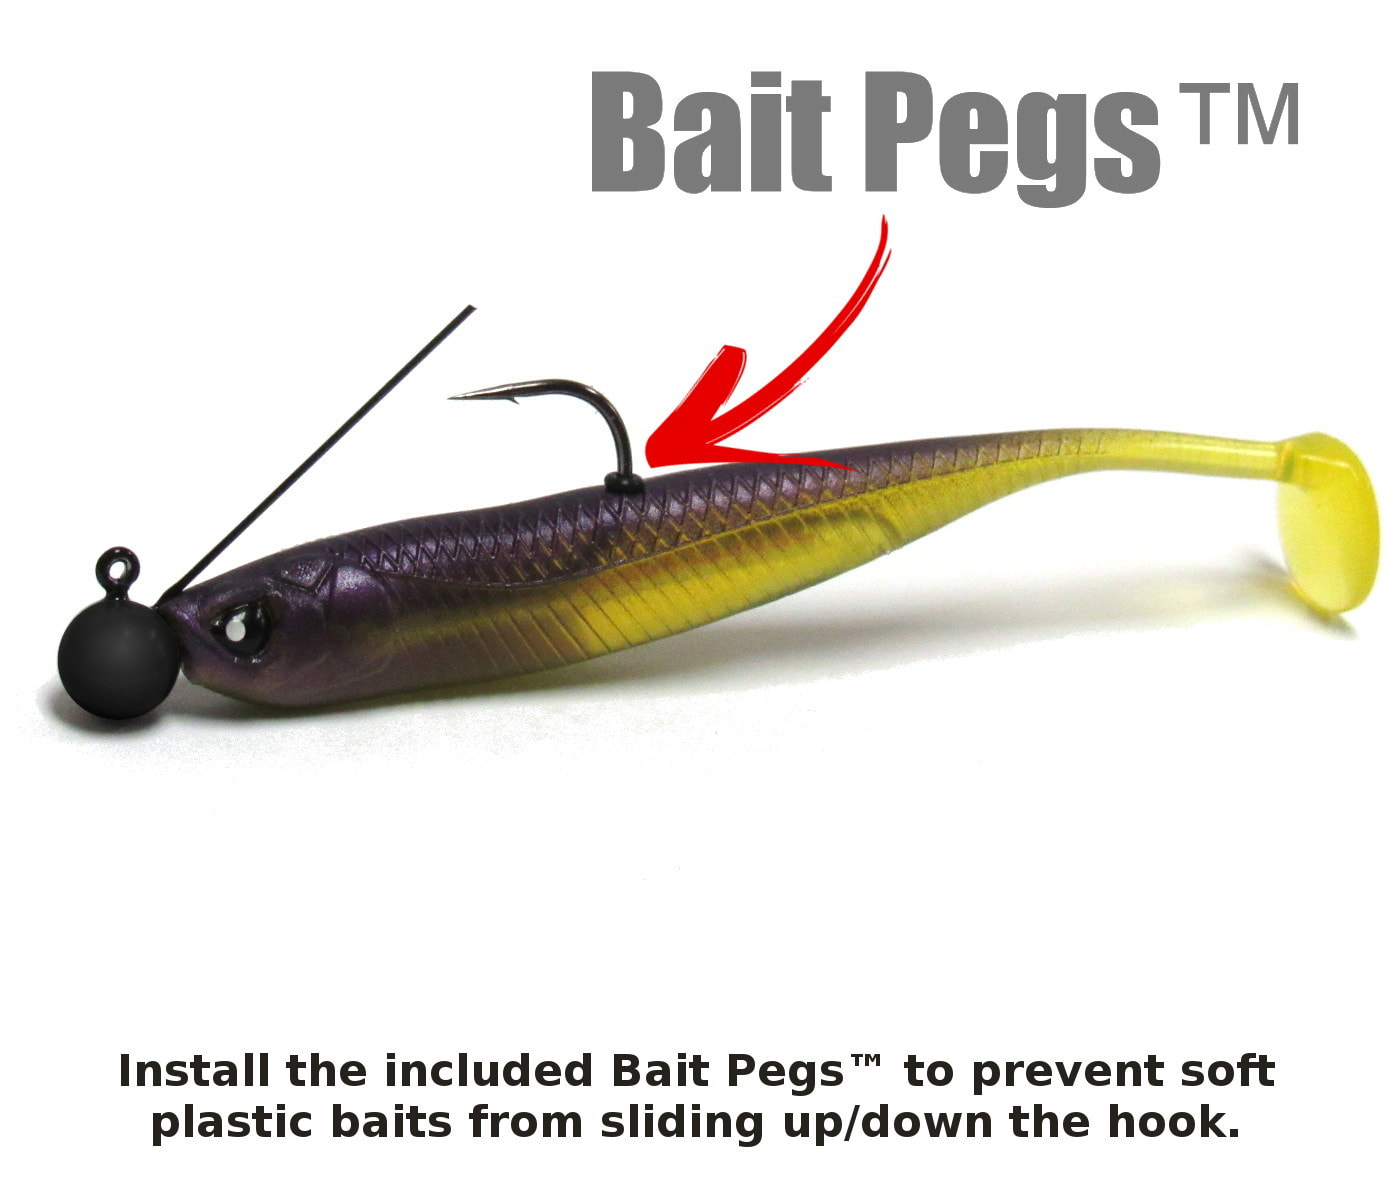 Pre-Rigged Jig Head Fishing Lures, Weedless Bass Baits for